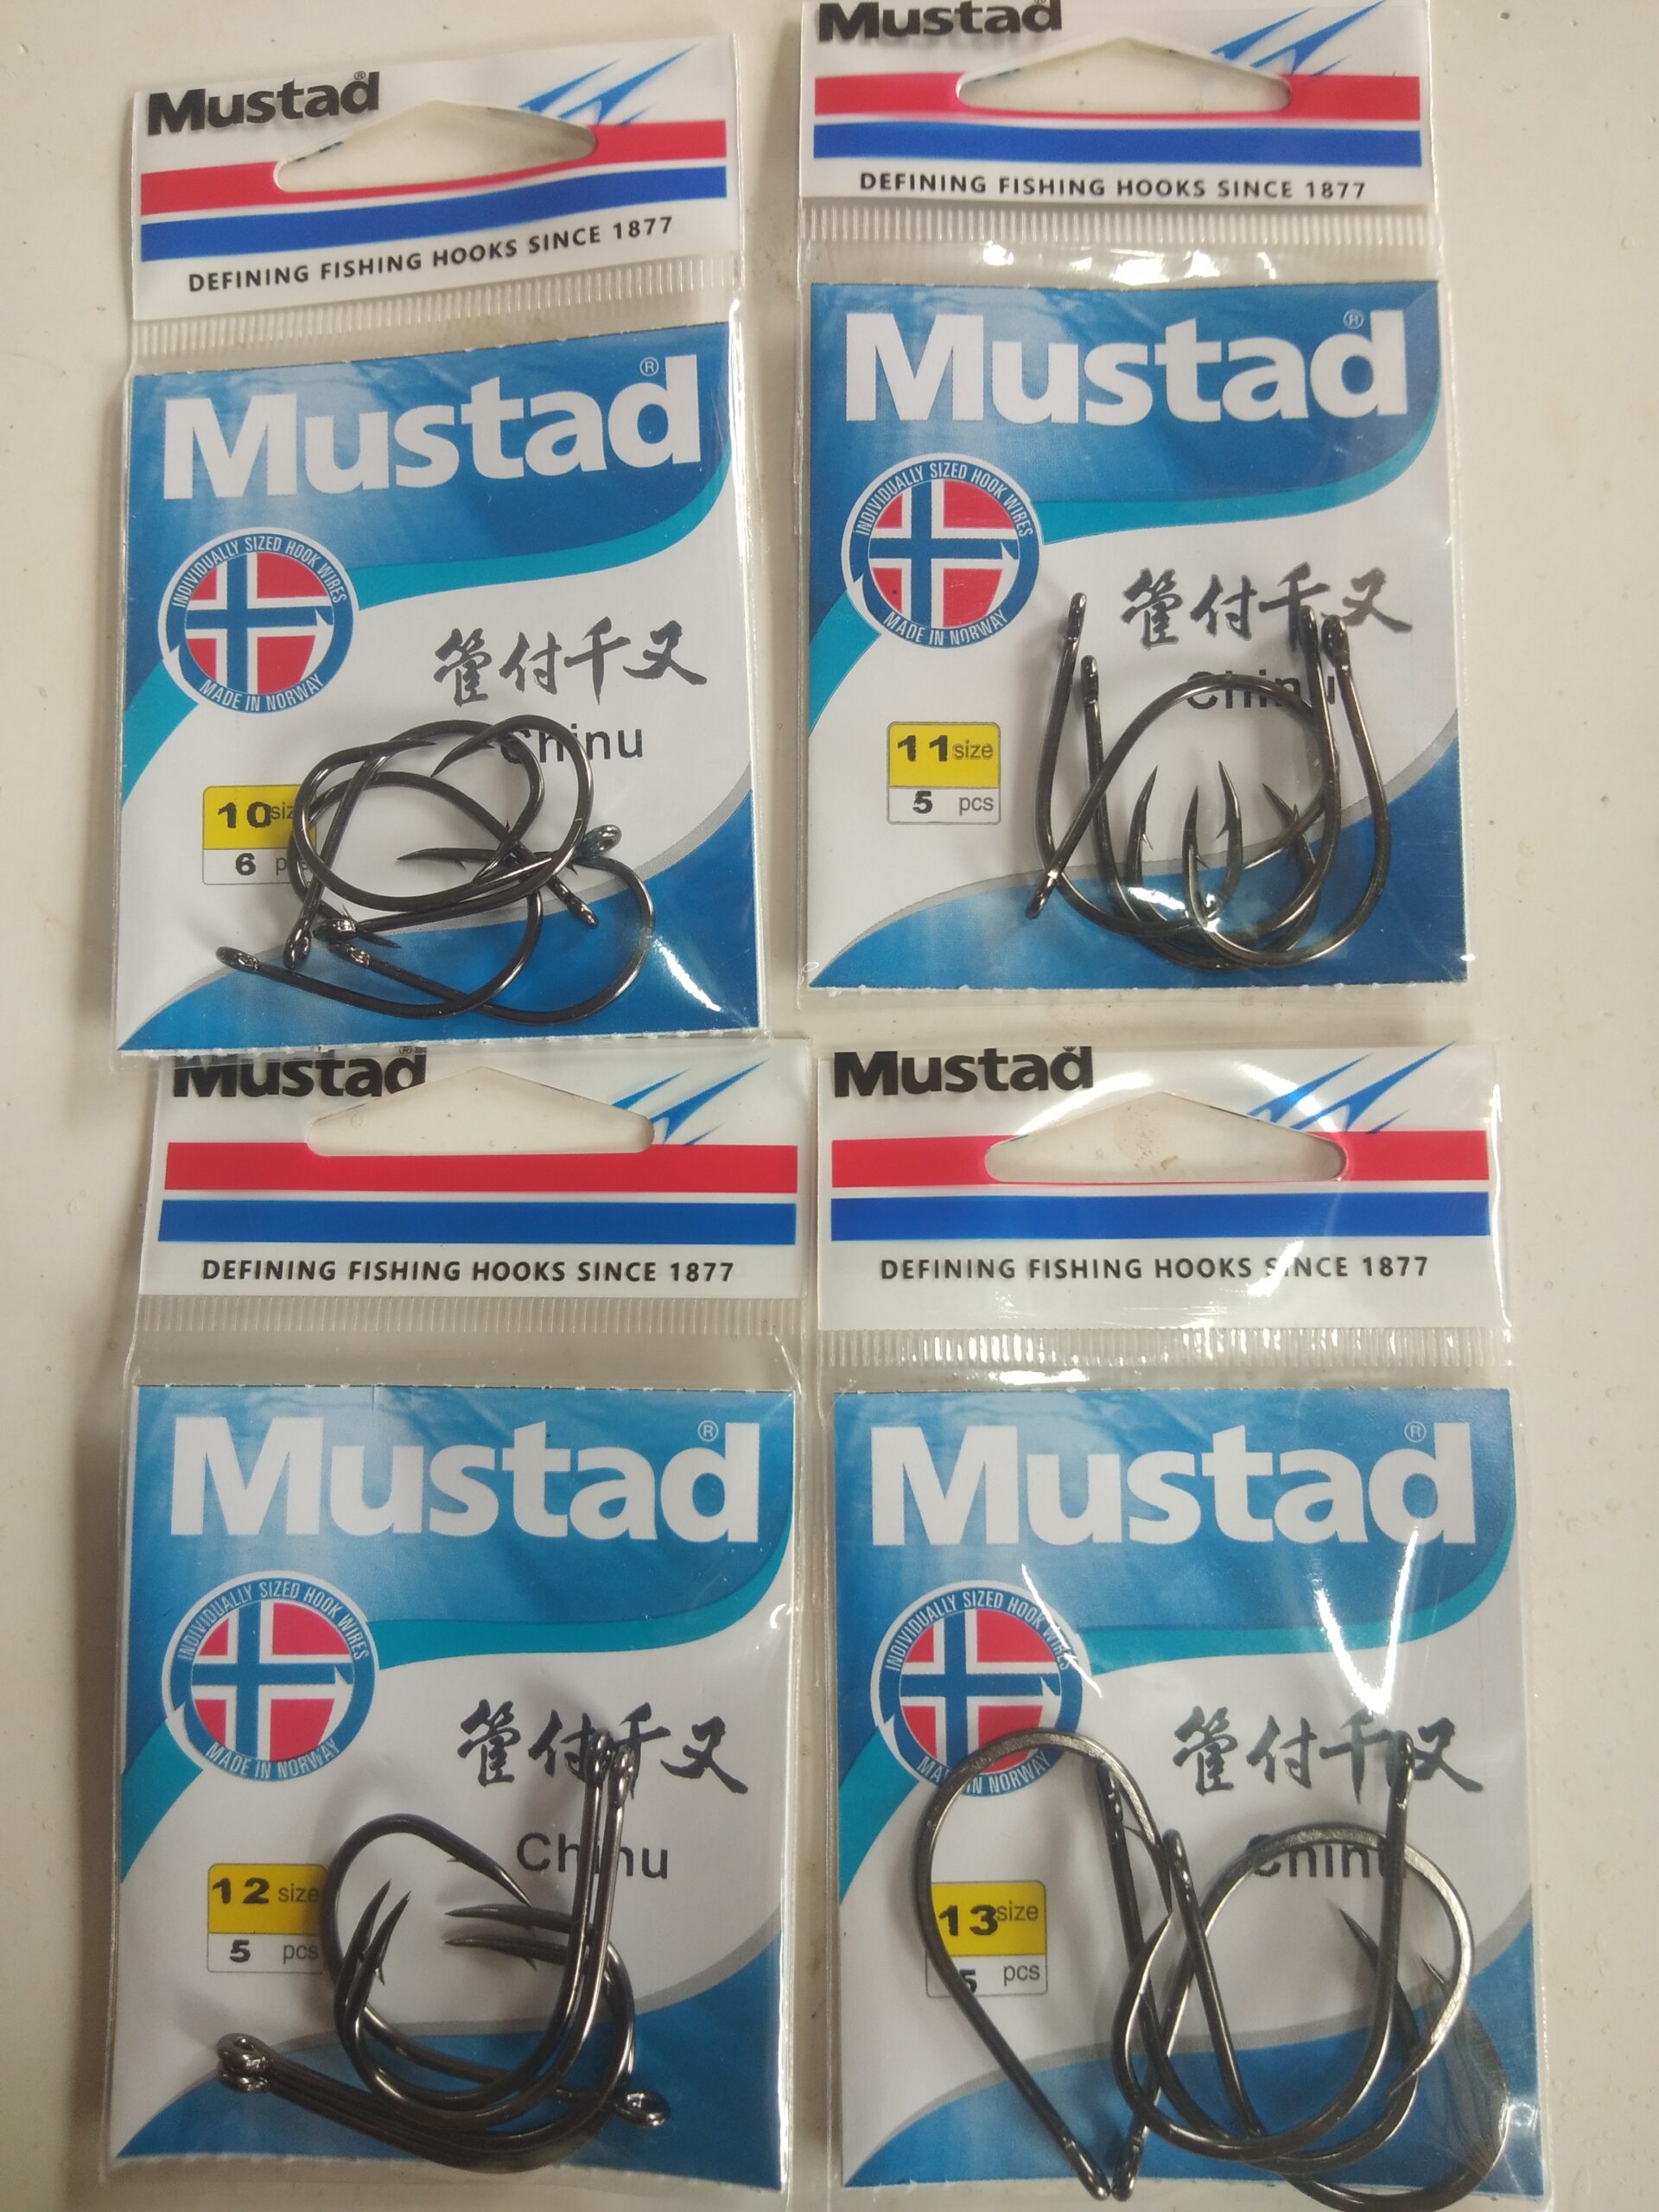 Mustad 10827NP-BN Ringed Hoodlum 4X Bait Hooks Size 2/0 Jagged Tooth Tackle